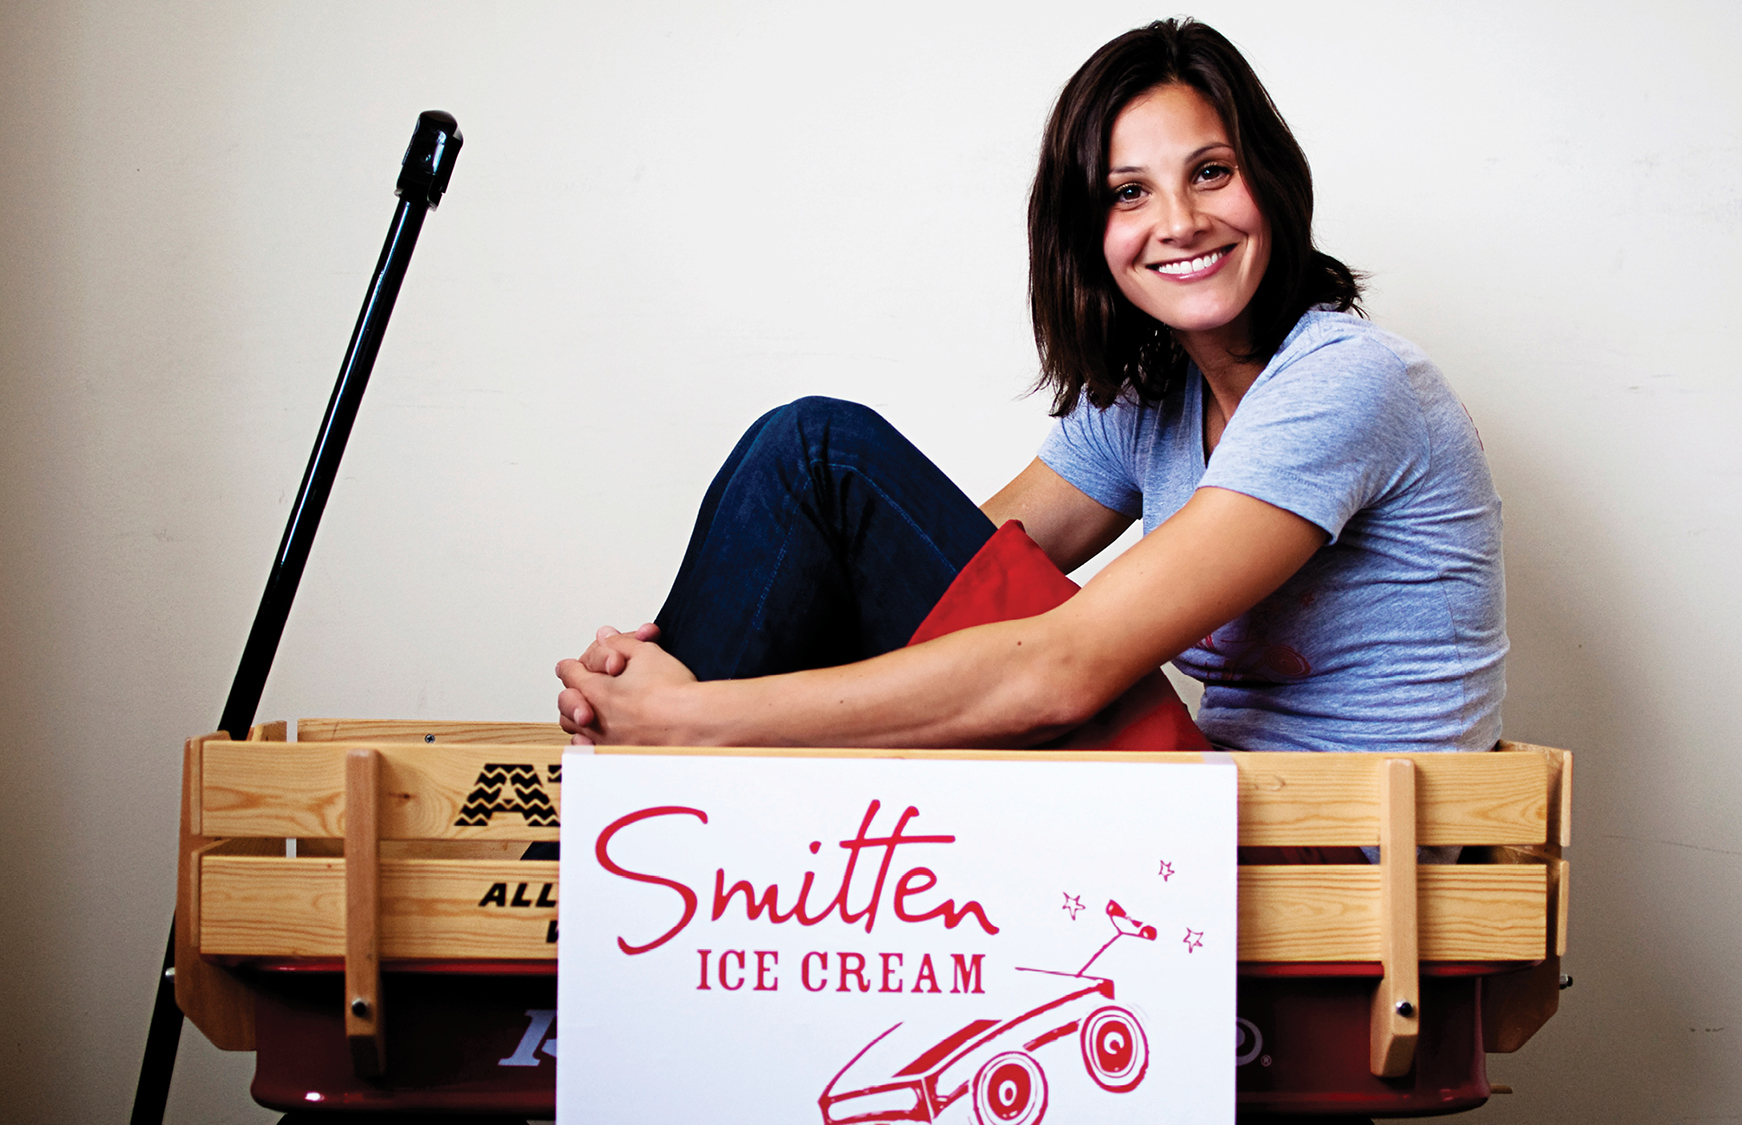 An Interview with the Founder of Smitten Ice Cream Image